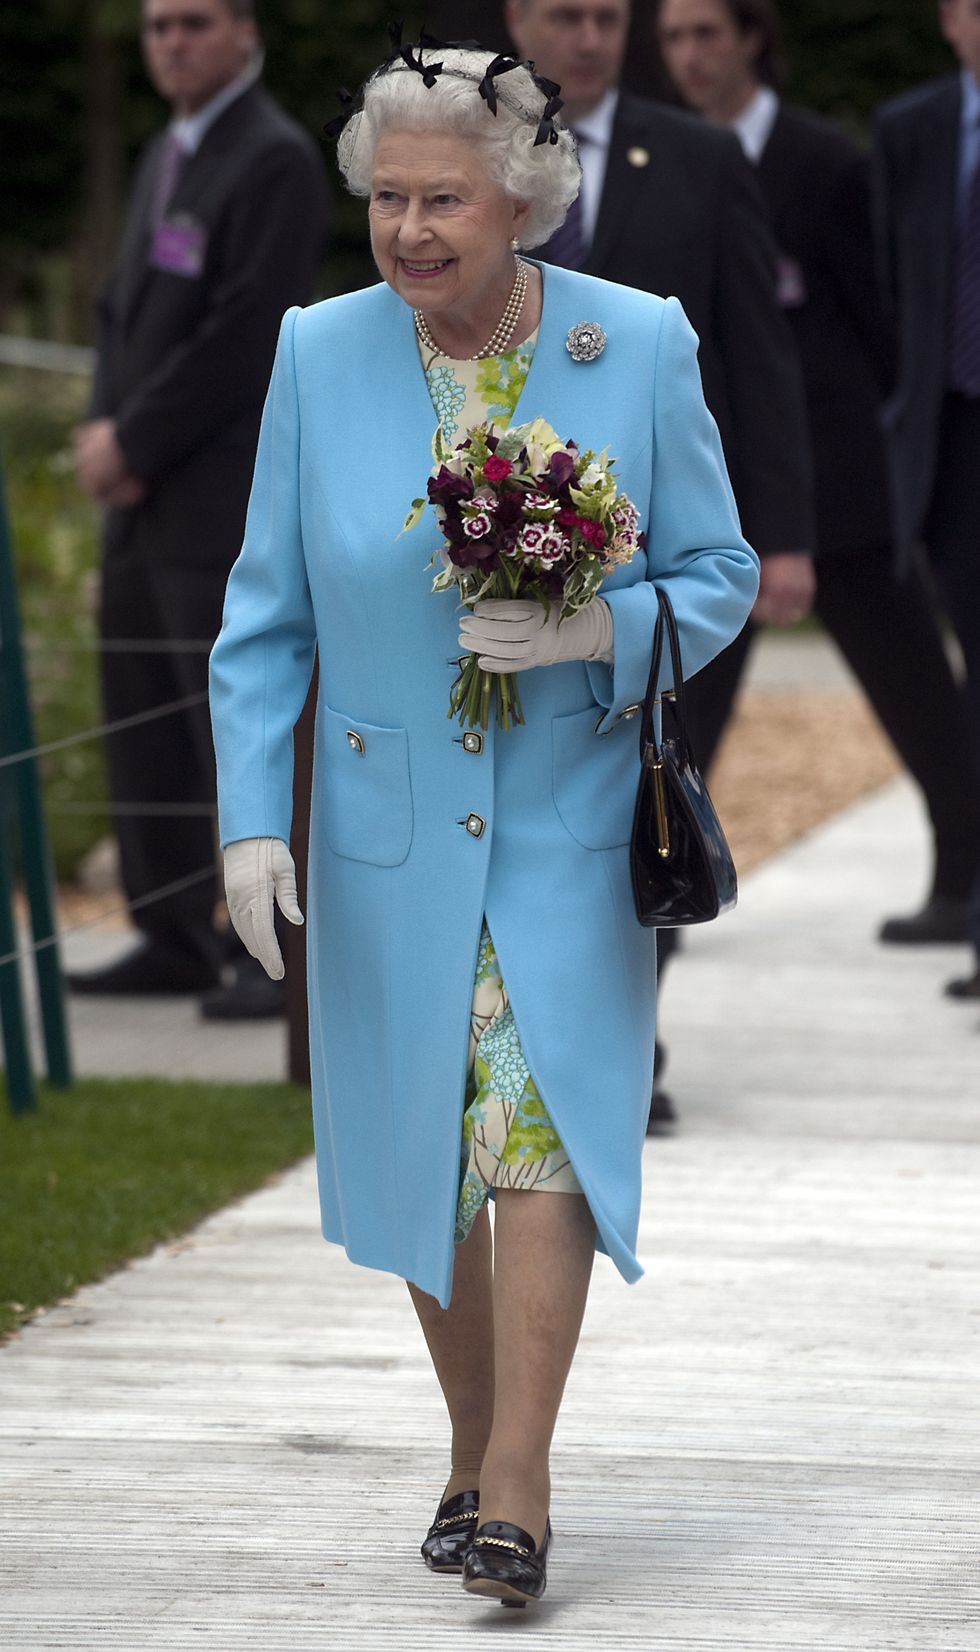 All the Queen's Chelsea Flower Show outfits